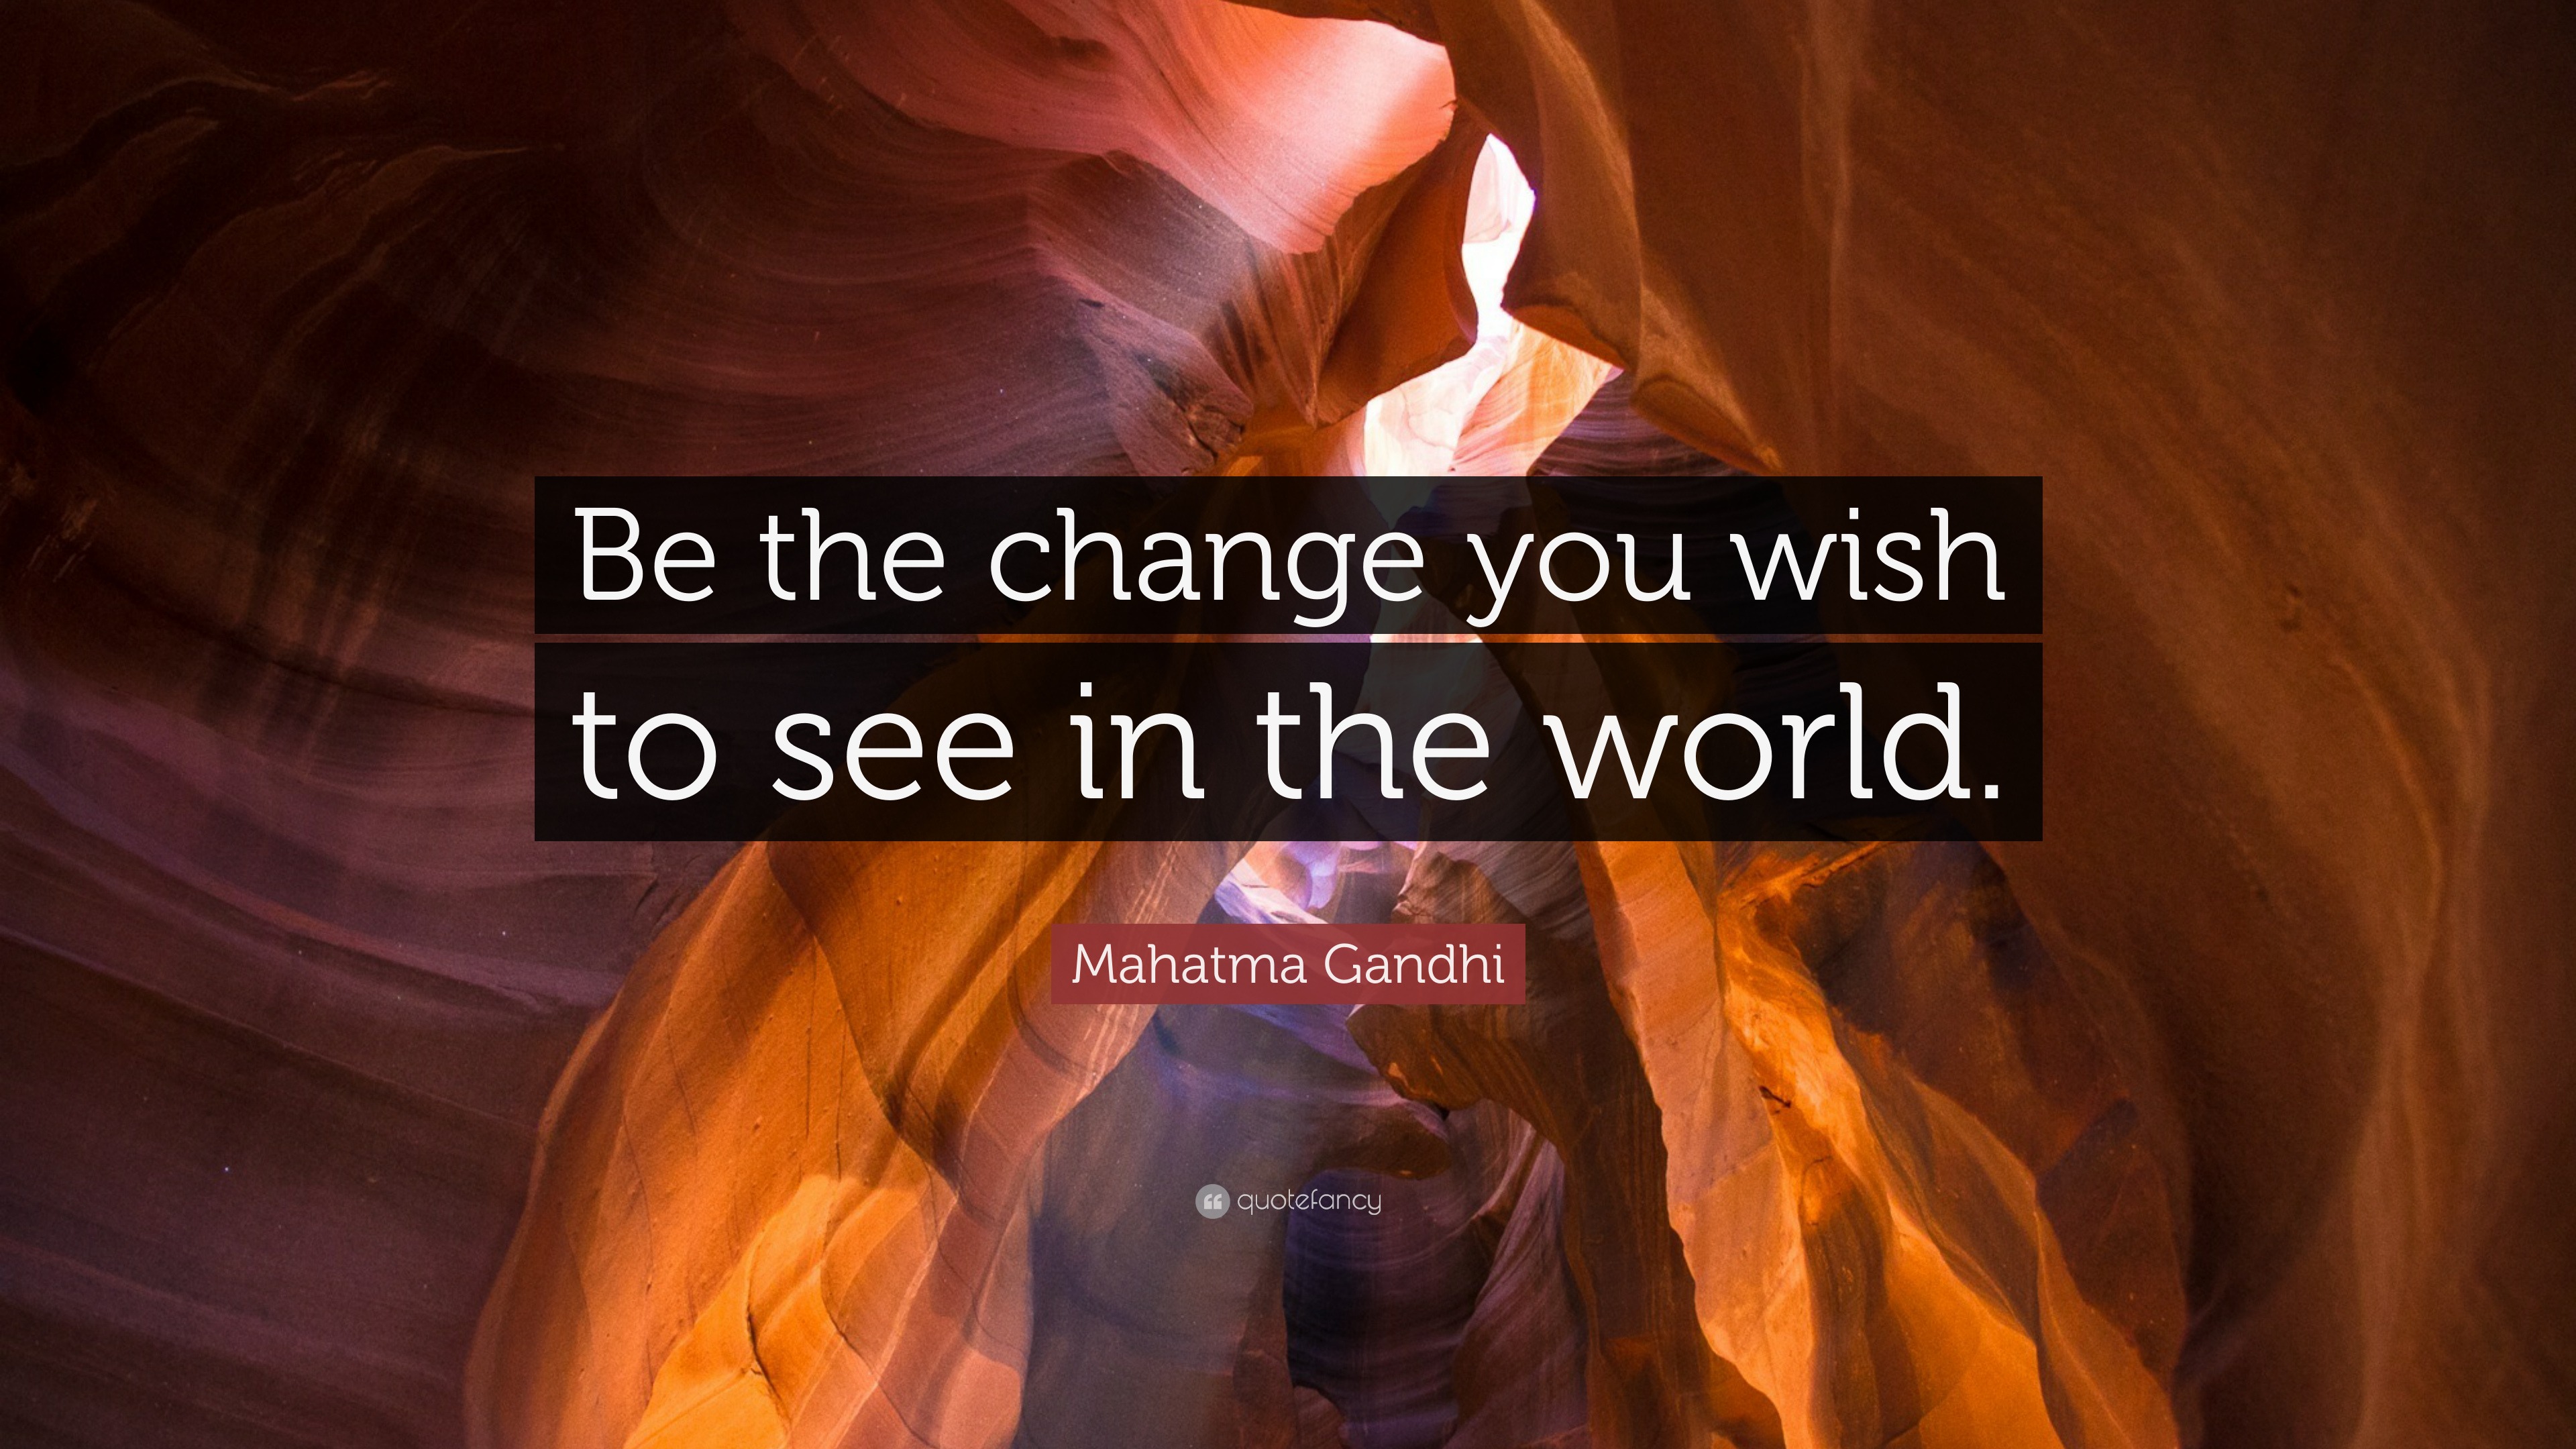 Mahatma Gandhi Quote: "Be the change you wish to see in the world." (35 wallpapers) - Quotefancy